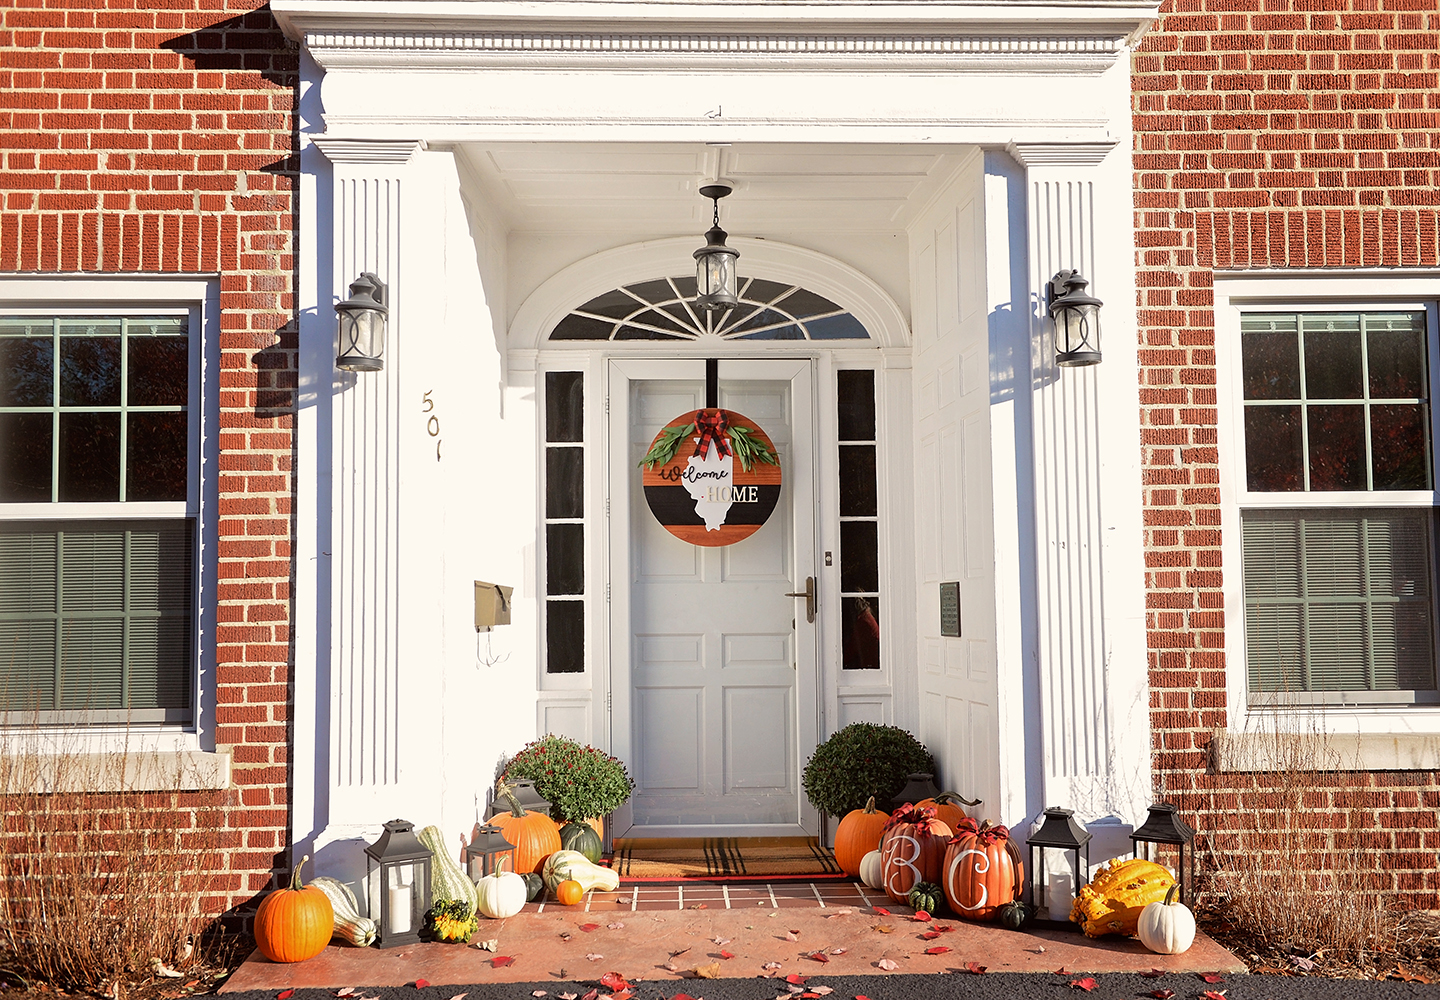 Shot of the entrance to the McKinley House. The front of the house is decorated with Fall themed ornaments and pumpkins.